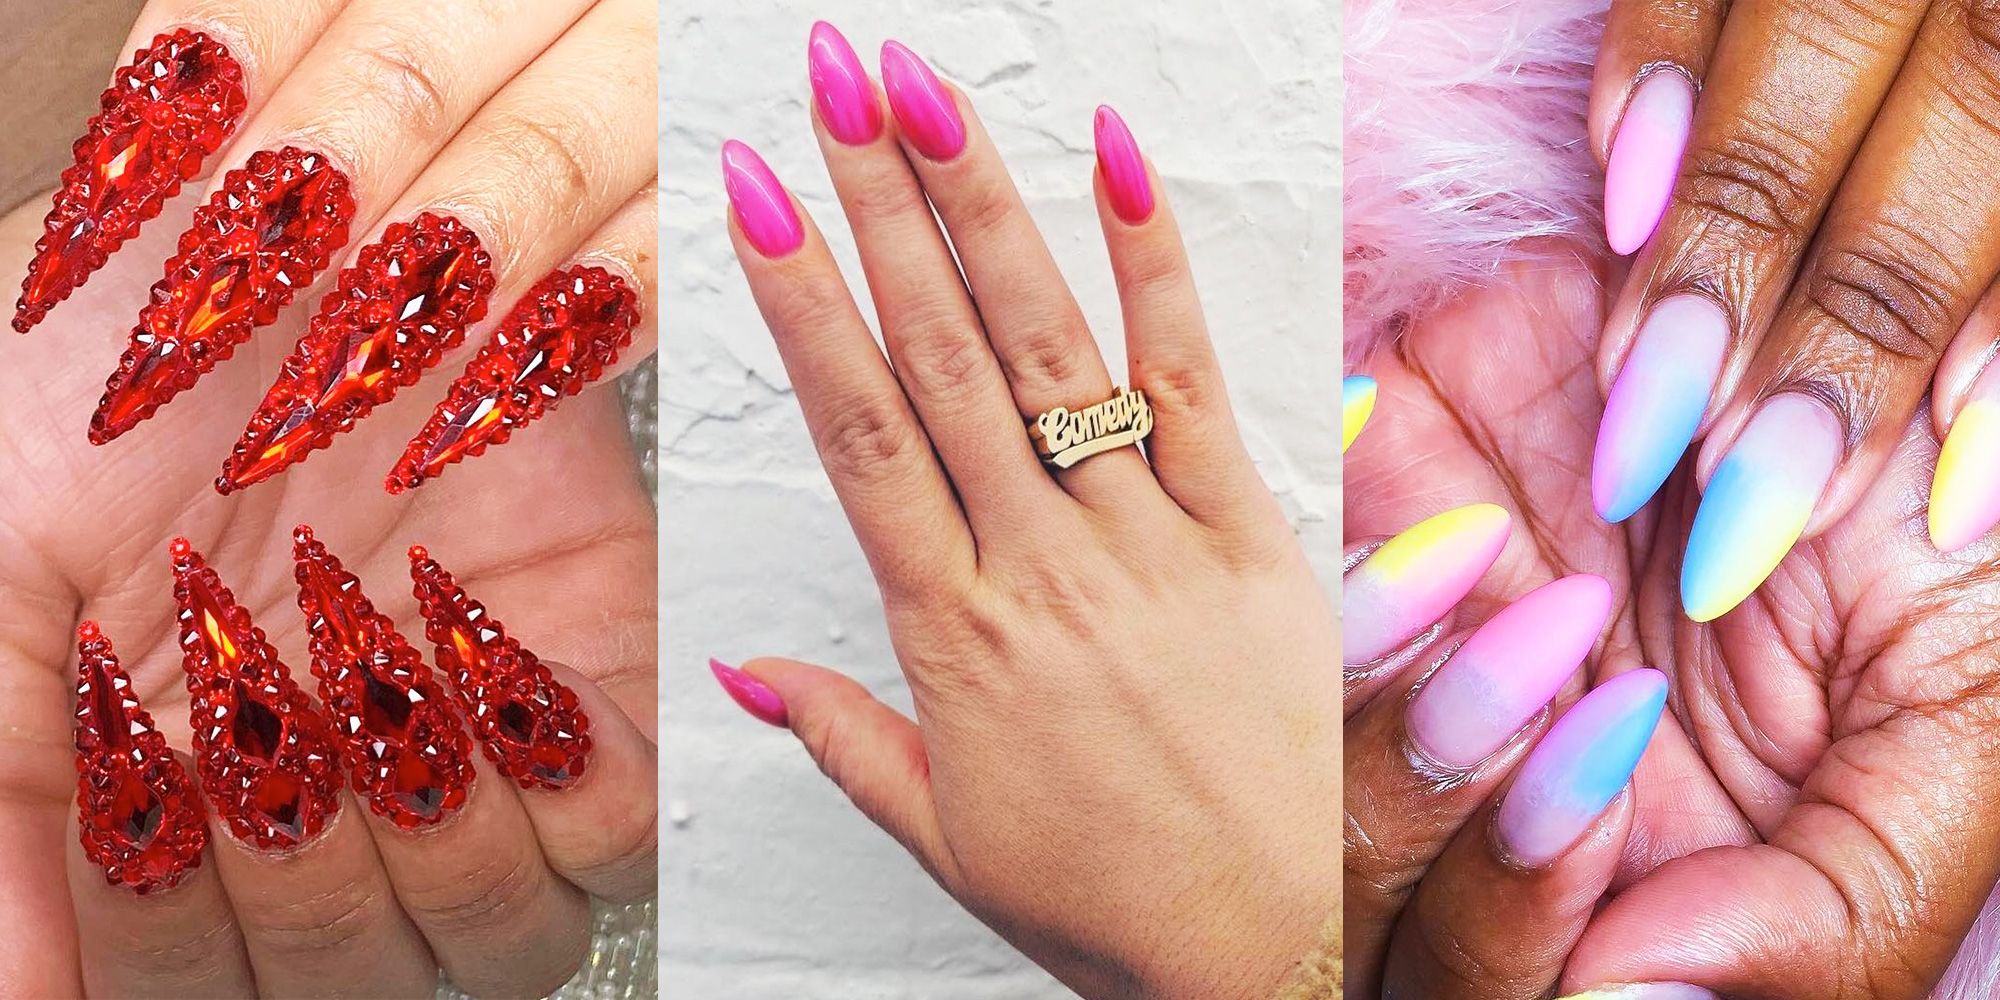 3. "Birthday Girl Approved: Trending Nail Colors for Your Special Day" - wide 4